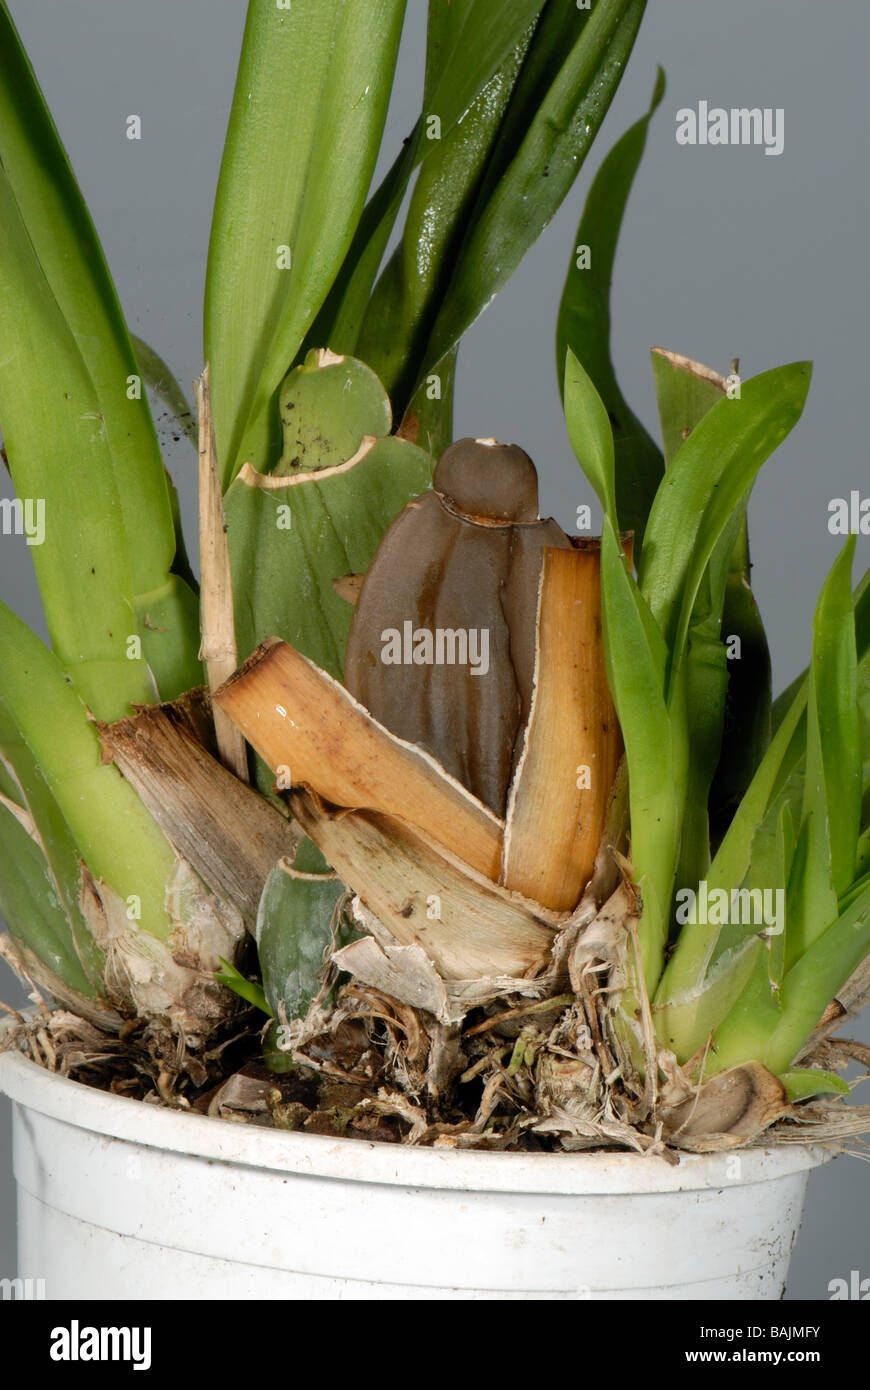 Root rot Phytophthora cactorum symptoms on an ornamental orchid house plant Stock Photo